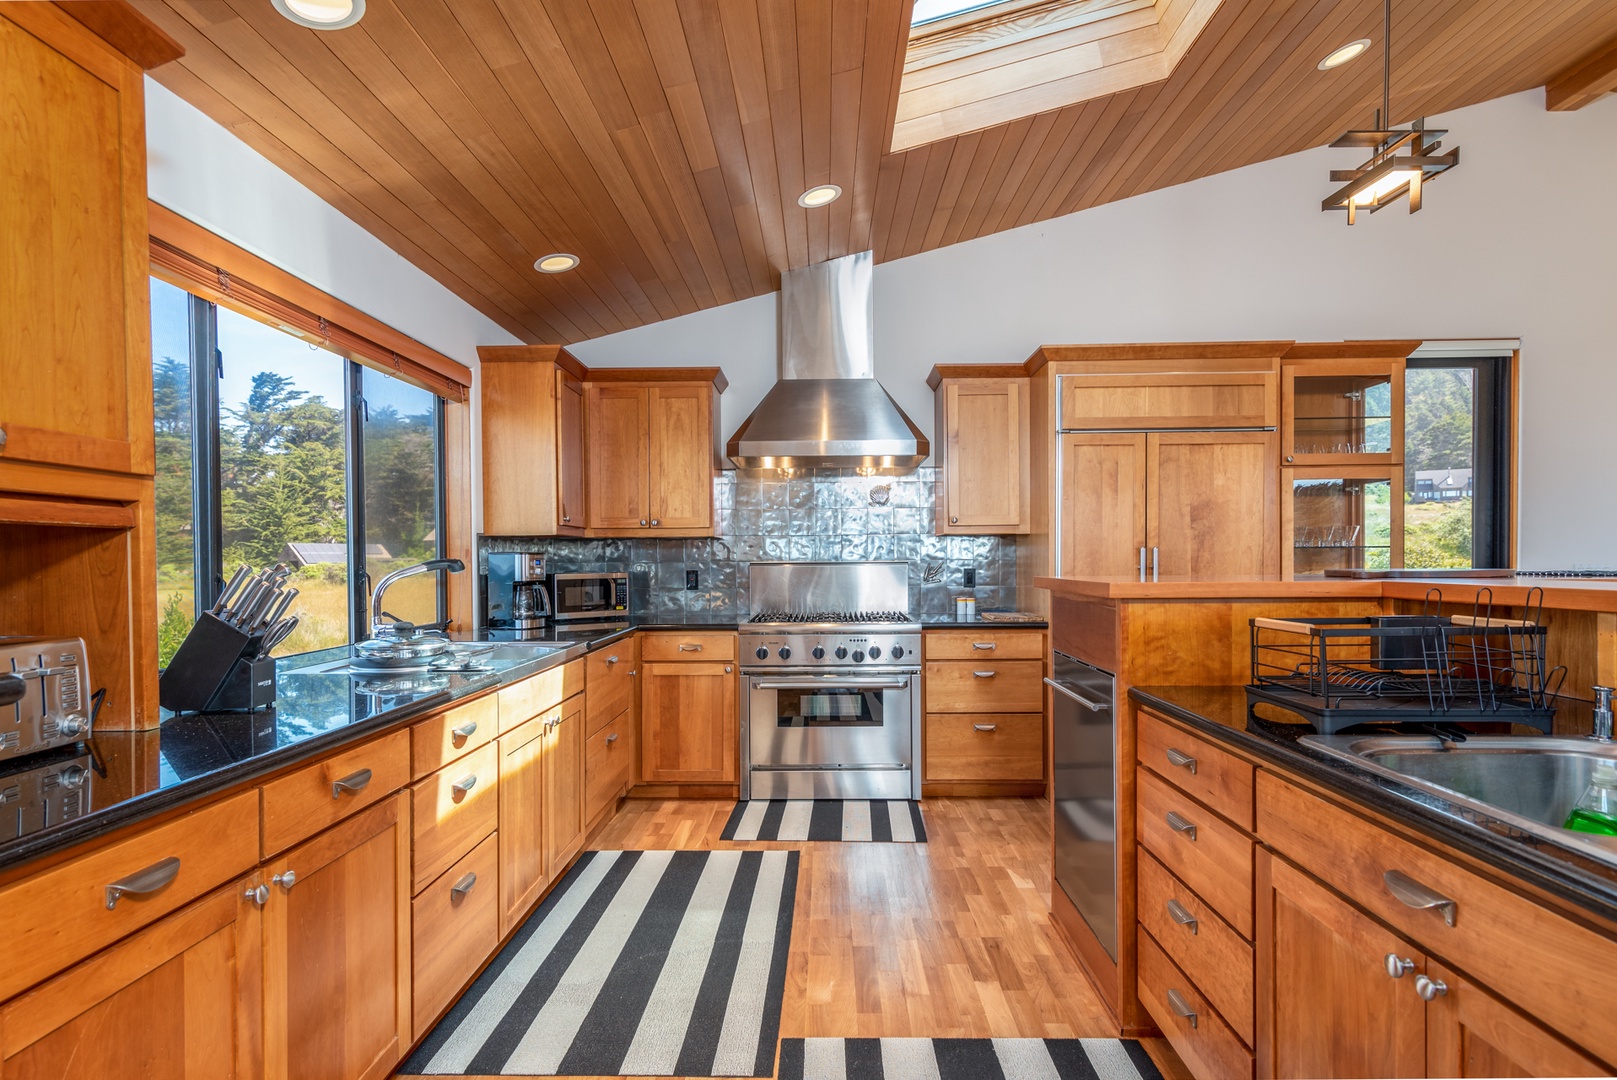 Gourmet kitchen with coffee maker, cookware, dishes and more